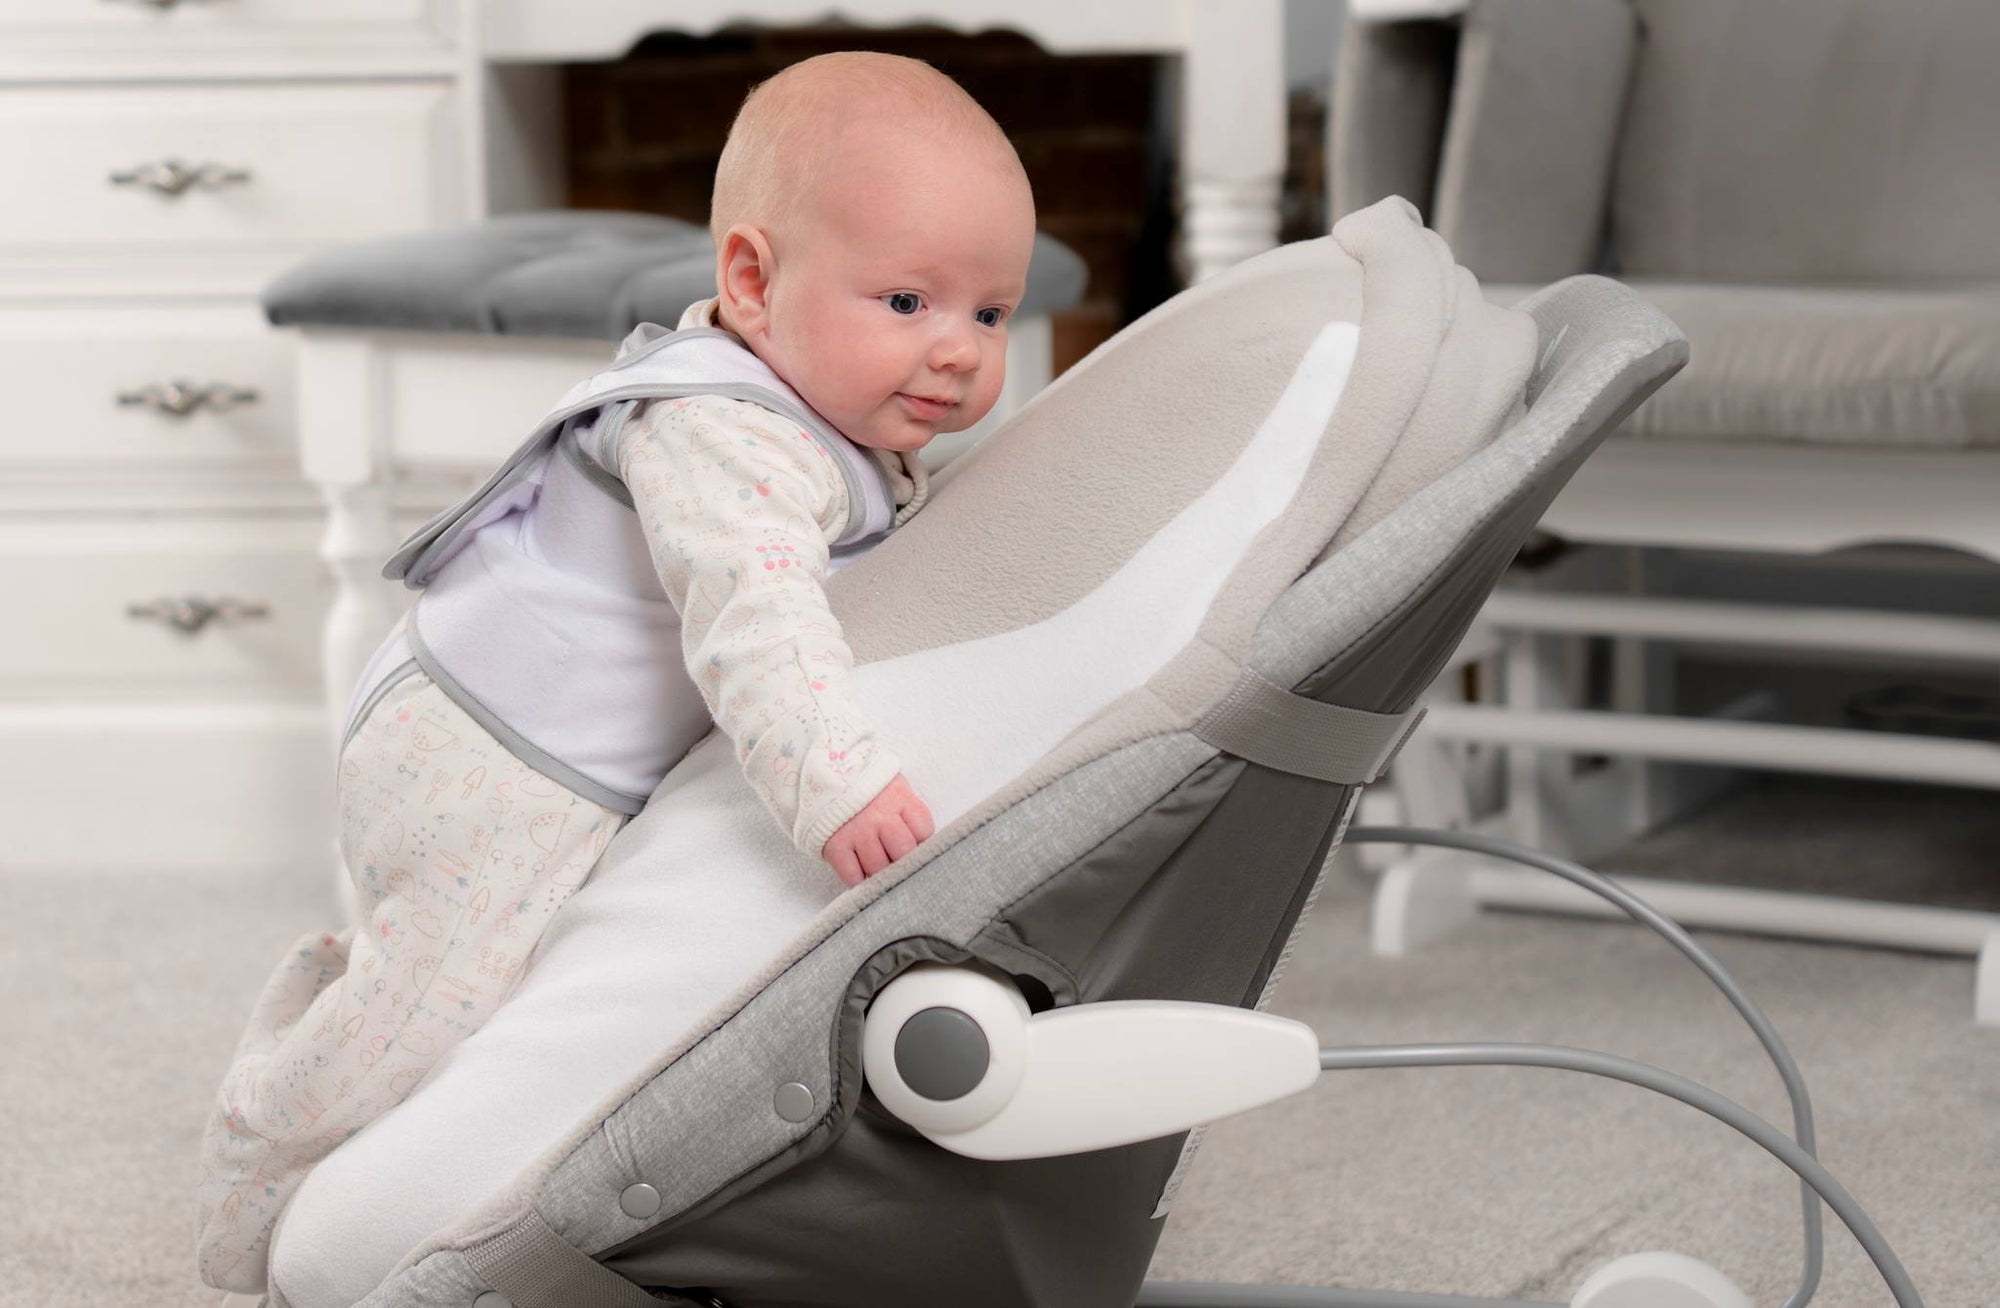 5 reasons why the Babocush should be on your baby shower gift list